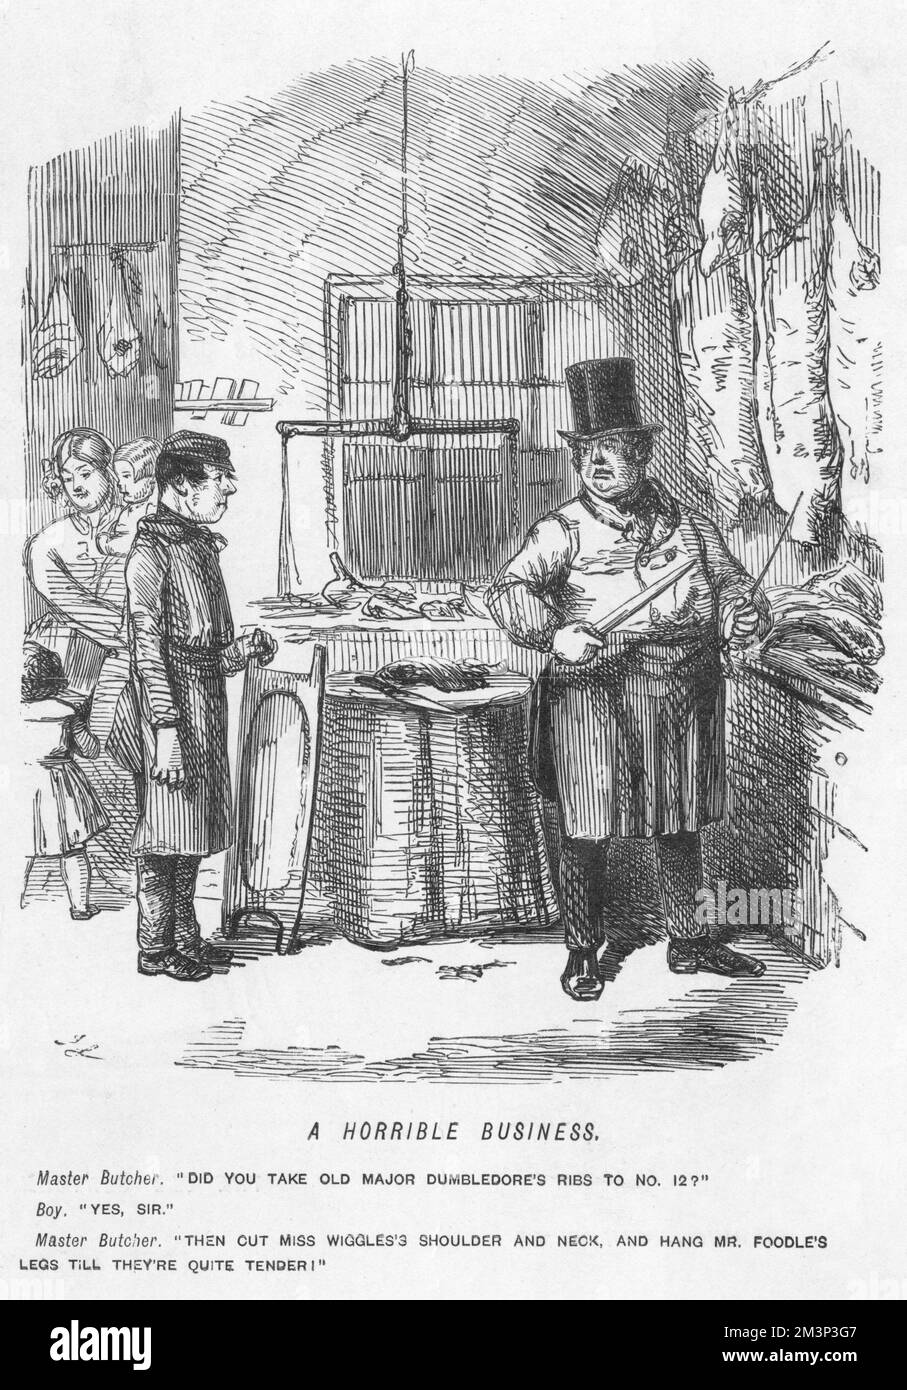 Humourous scene from a butcher's shop, 1851.    Master Butcher: &quot; Did you take old Major Dumbledore's ribs to No. 12?&quot;  Boy: &quot;Yes, Sir.&quot;  Master Butcher: &quot;Then cut Miss Wiggle's shoulder and neck, and hang Mrs. Foodles's legs til they're quite tender!&quot;       Date: 1851 Stock Photo